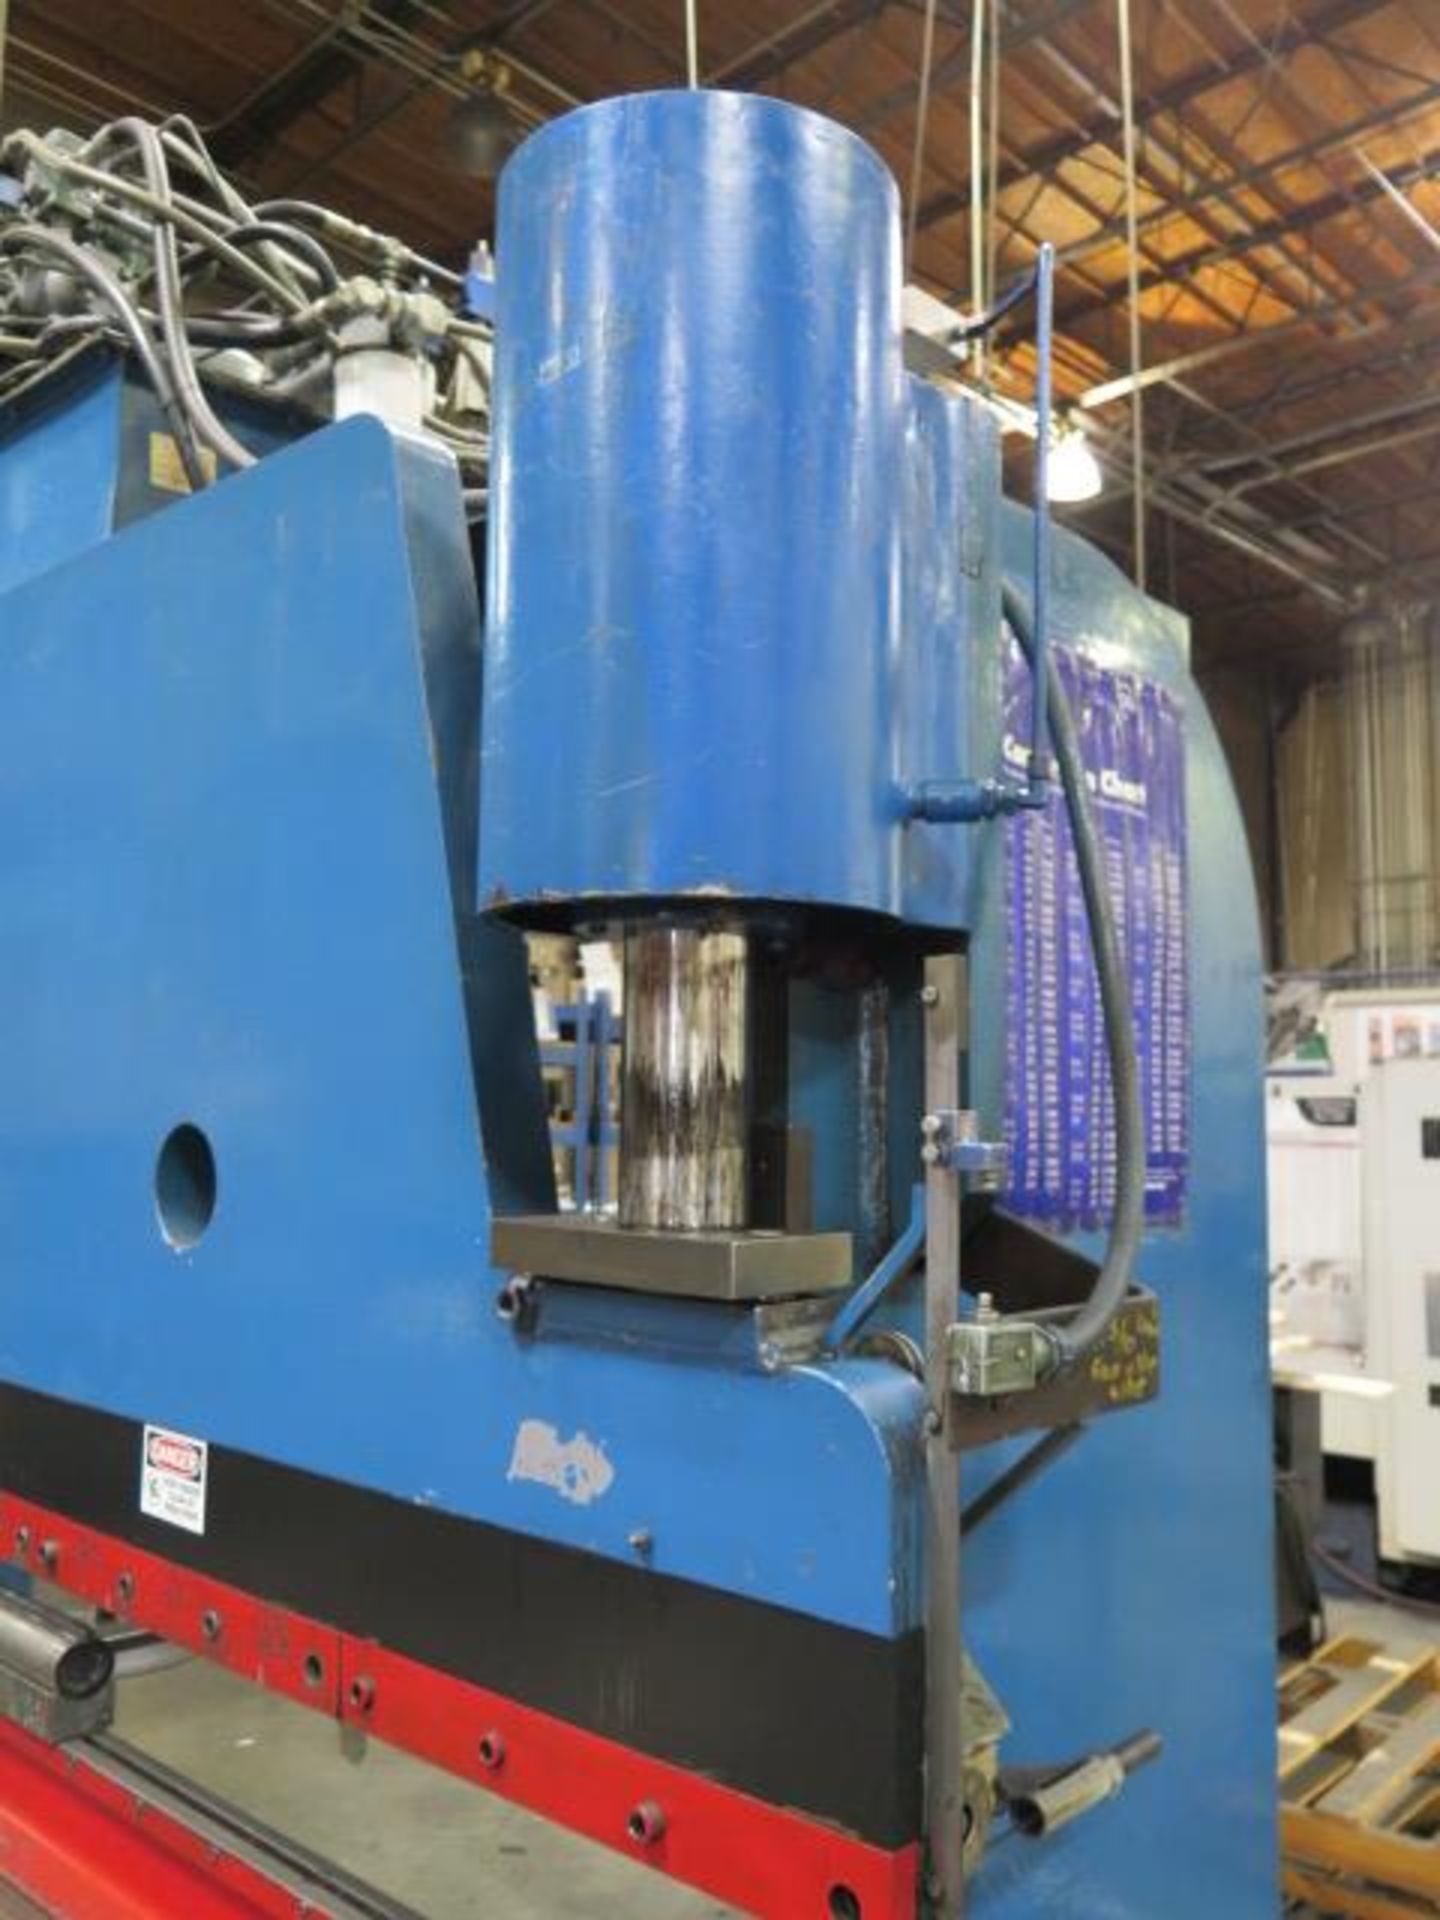 Pacific 100 Ton x 12’ Hyd Press Brake w/ 12’ Bed Length, 6 ¼” Throat, 124 ½” Between, SOLD AS IS - Image 6 of 14